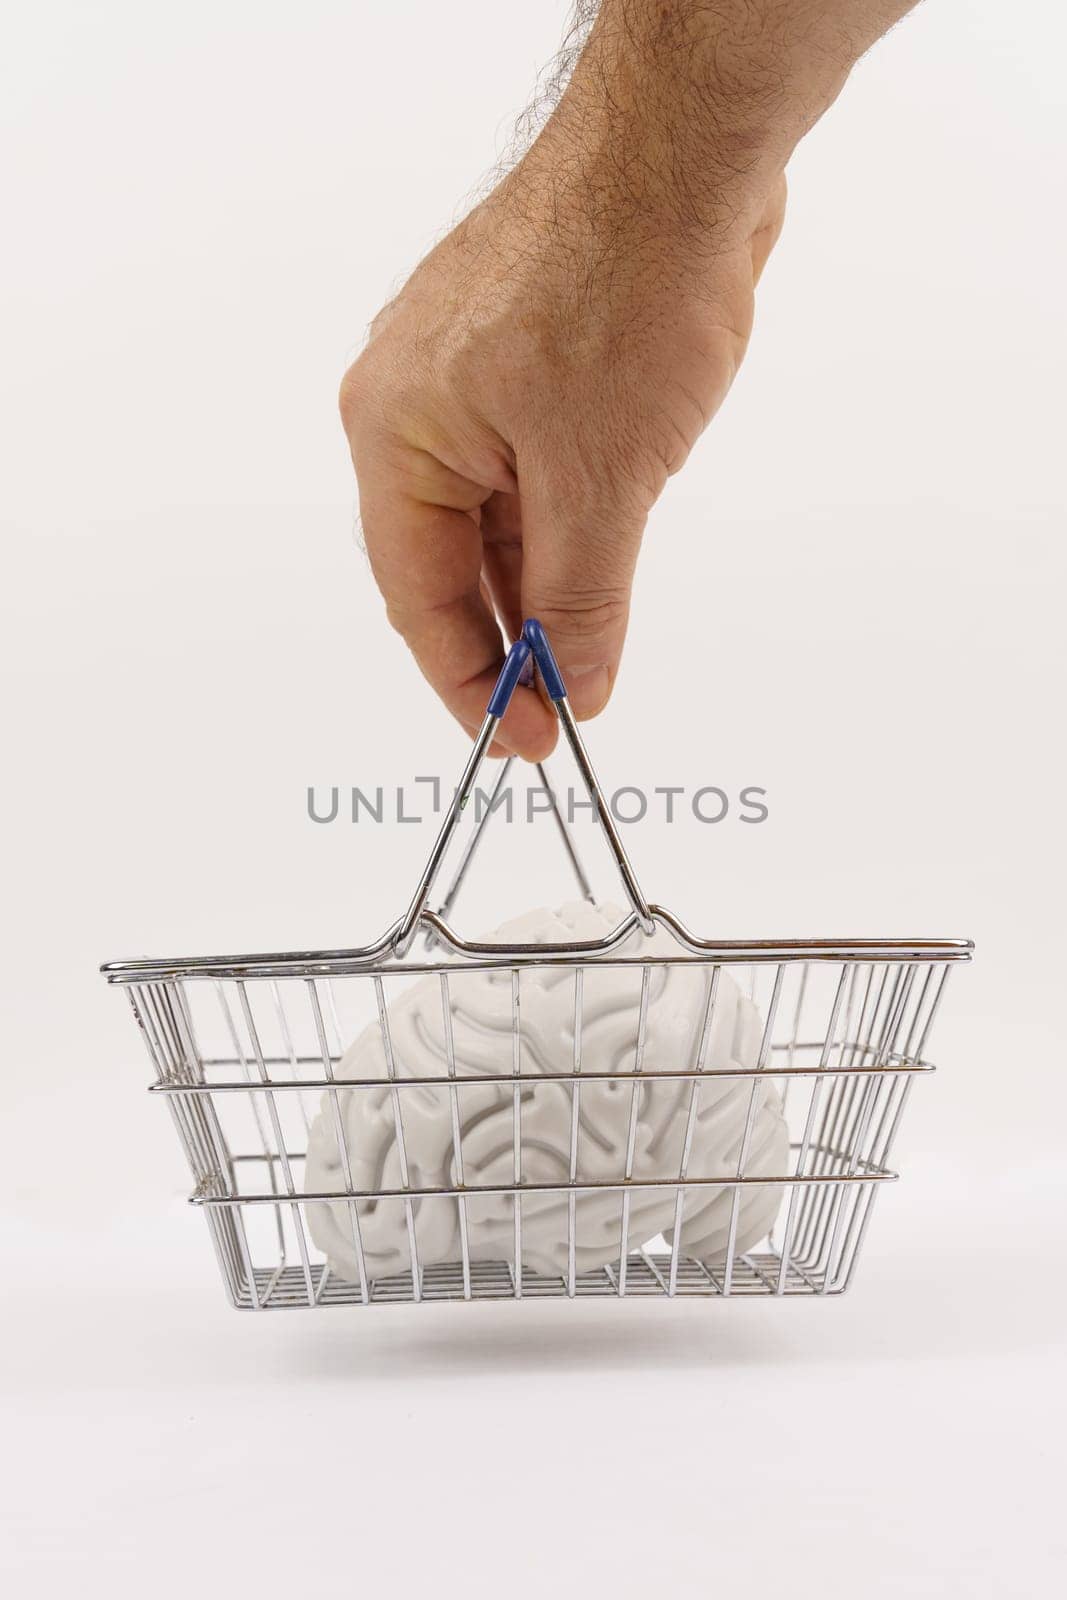 A man's hand holds a shopping basket with a human brain inside. by Sd28DimoN_1976